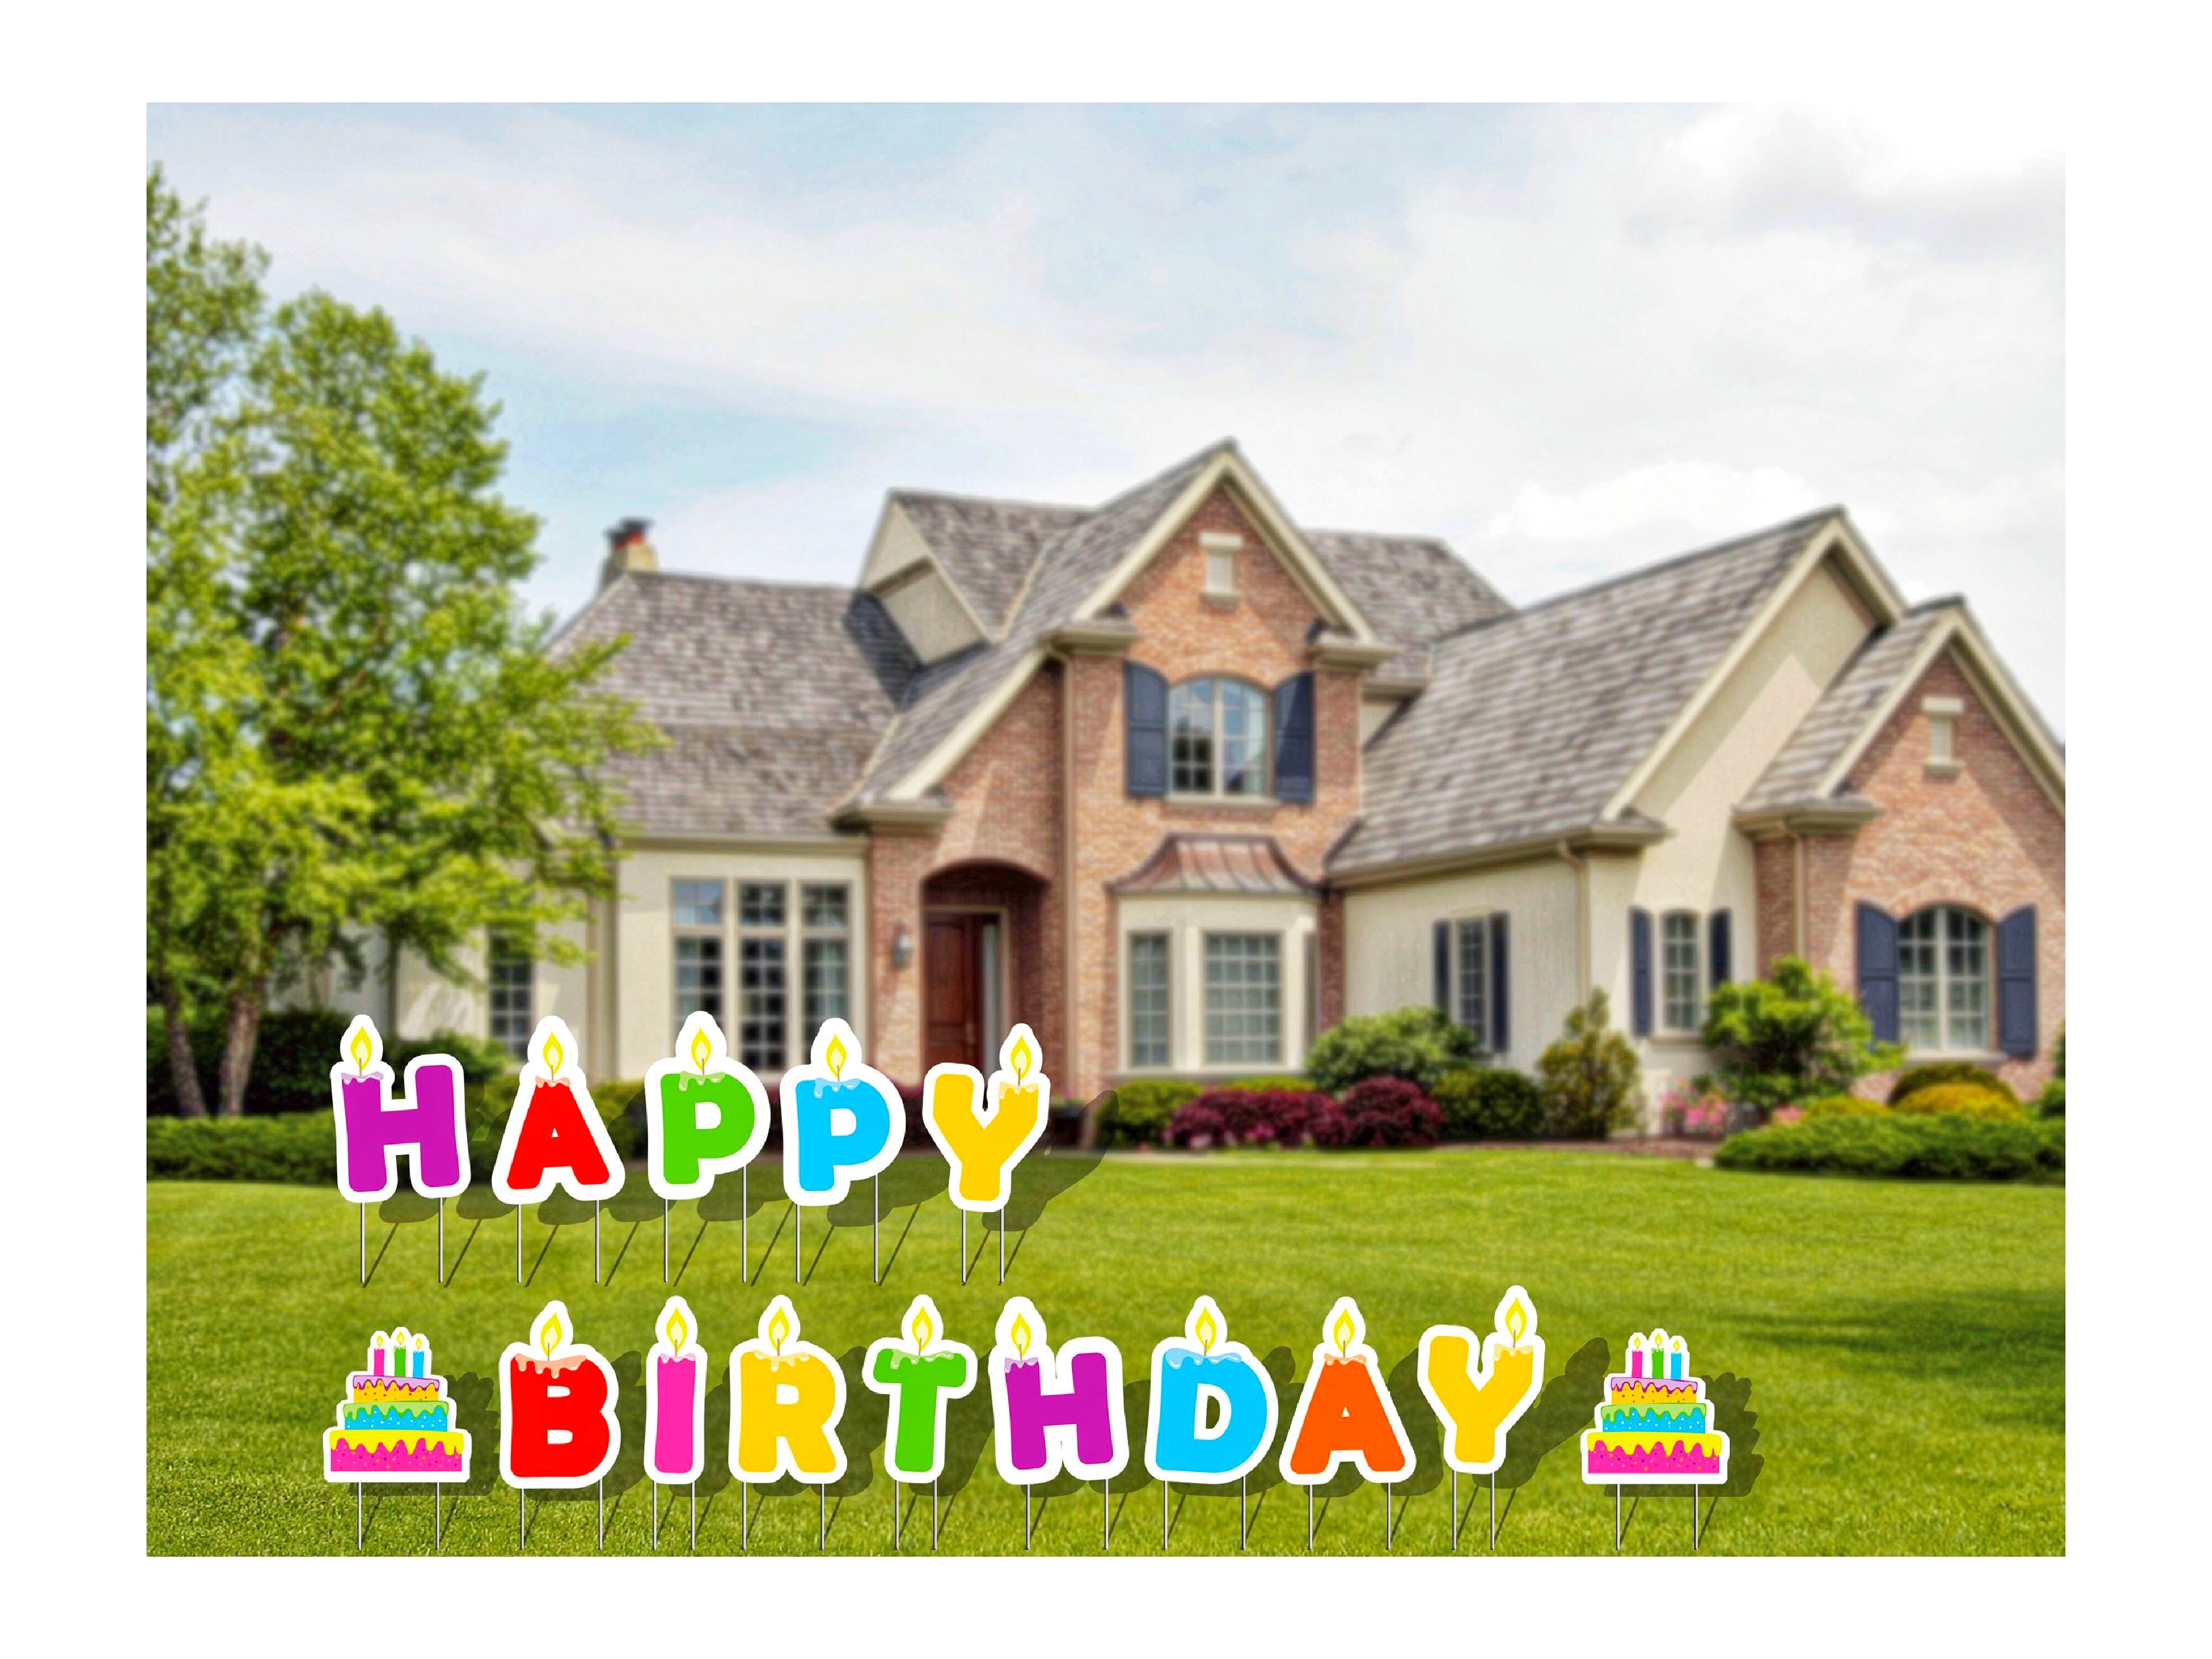 How Much Do Happy Birthday Yard Signs Cost